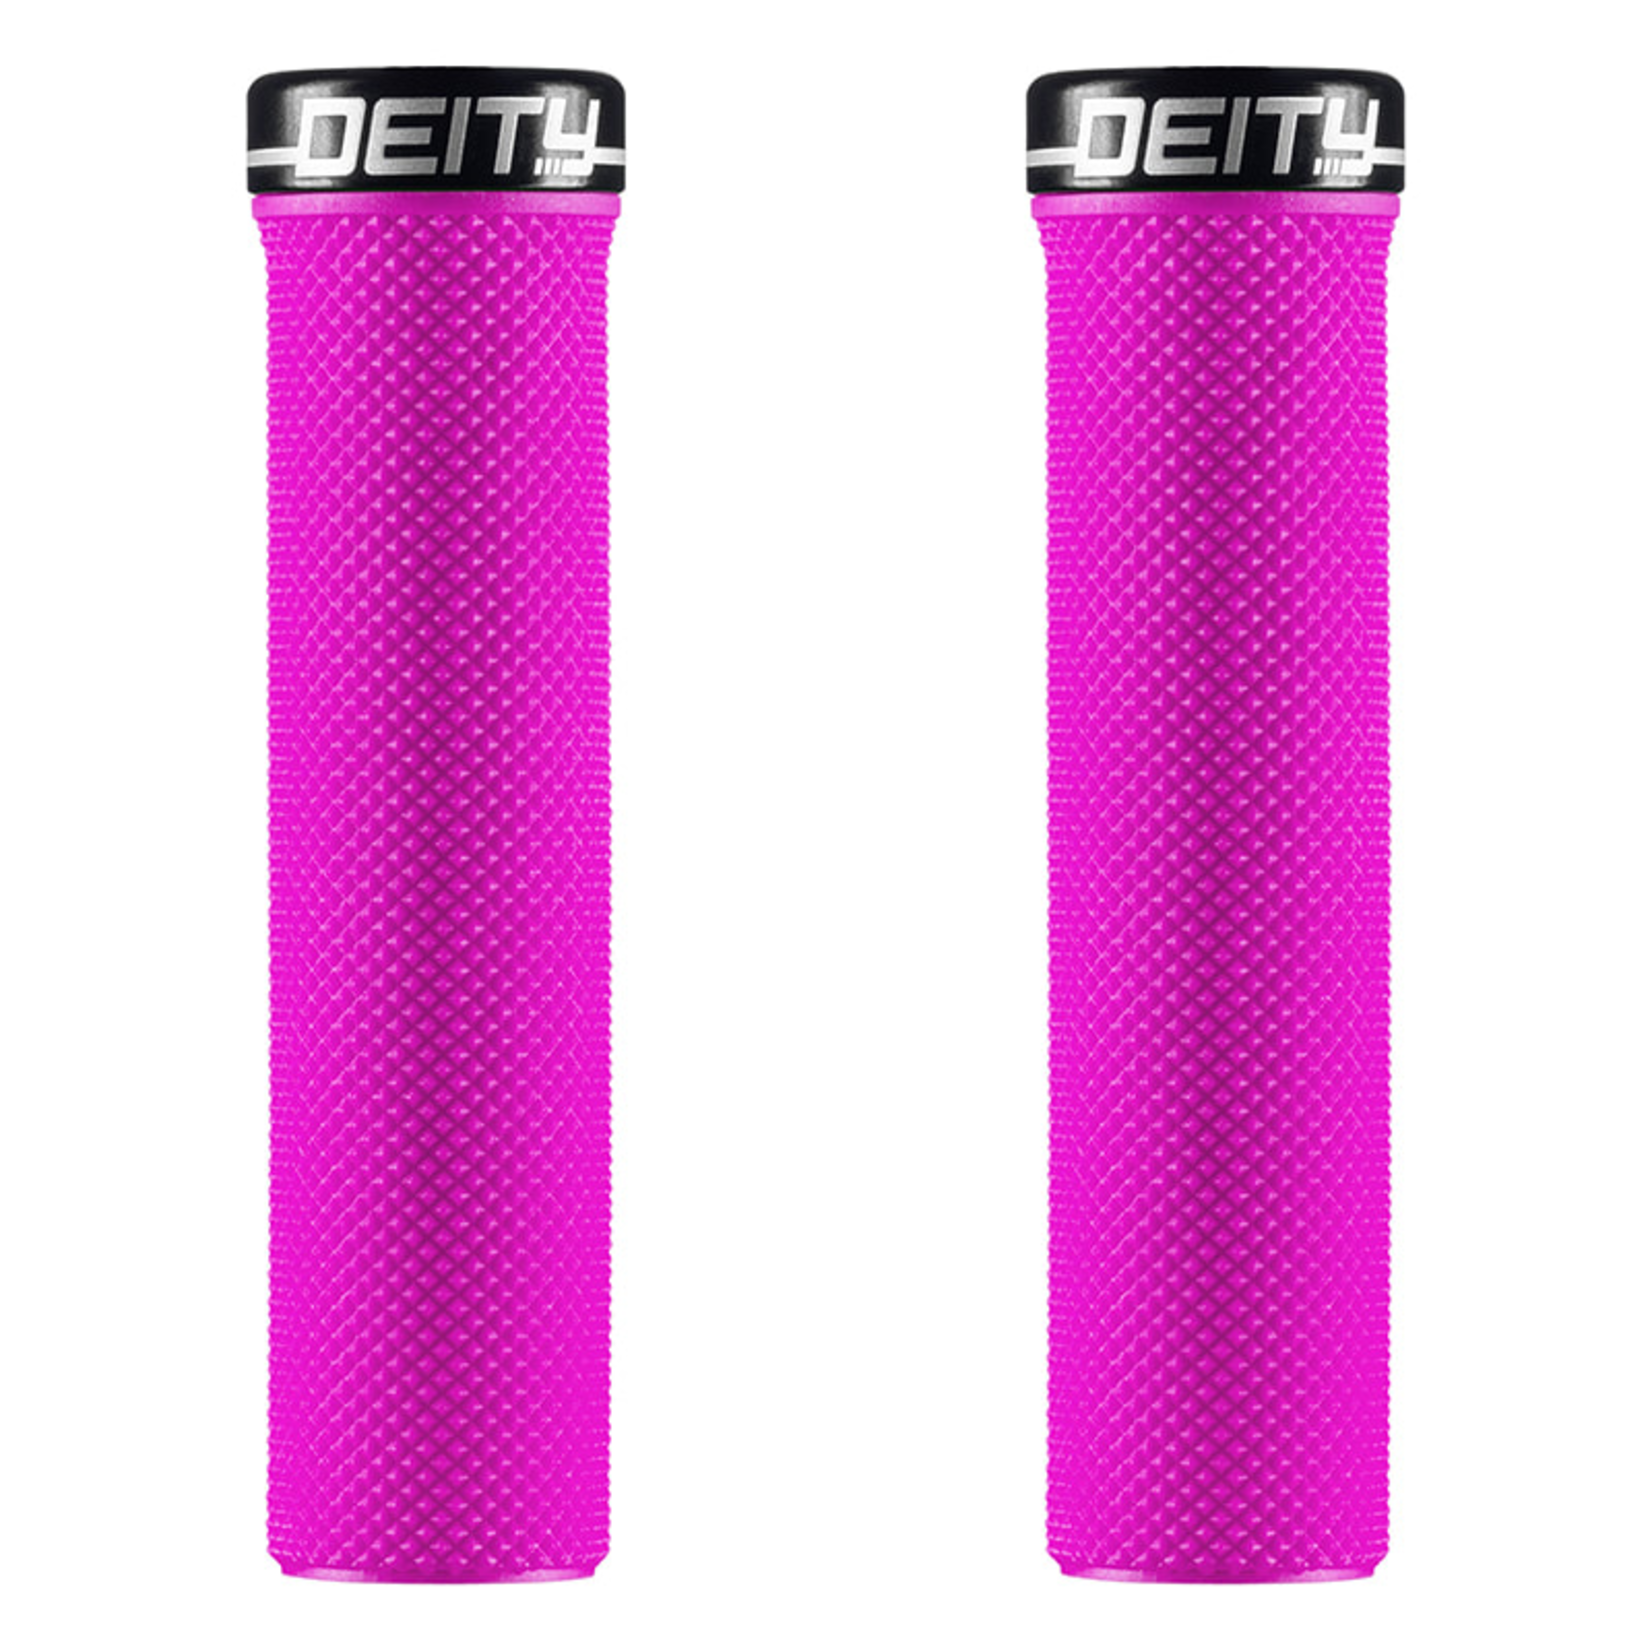 Deity Components Slimfit Grips